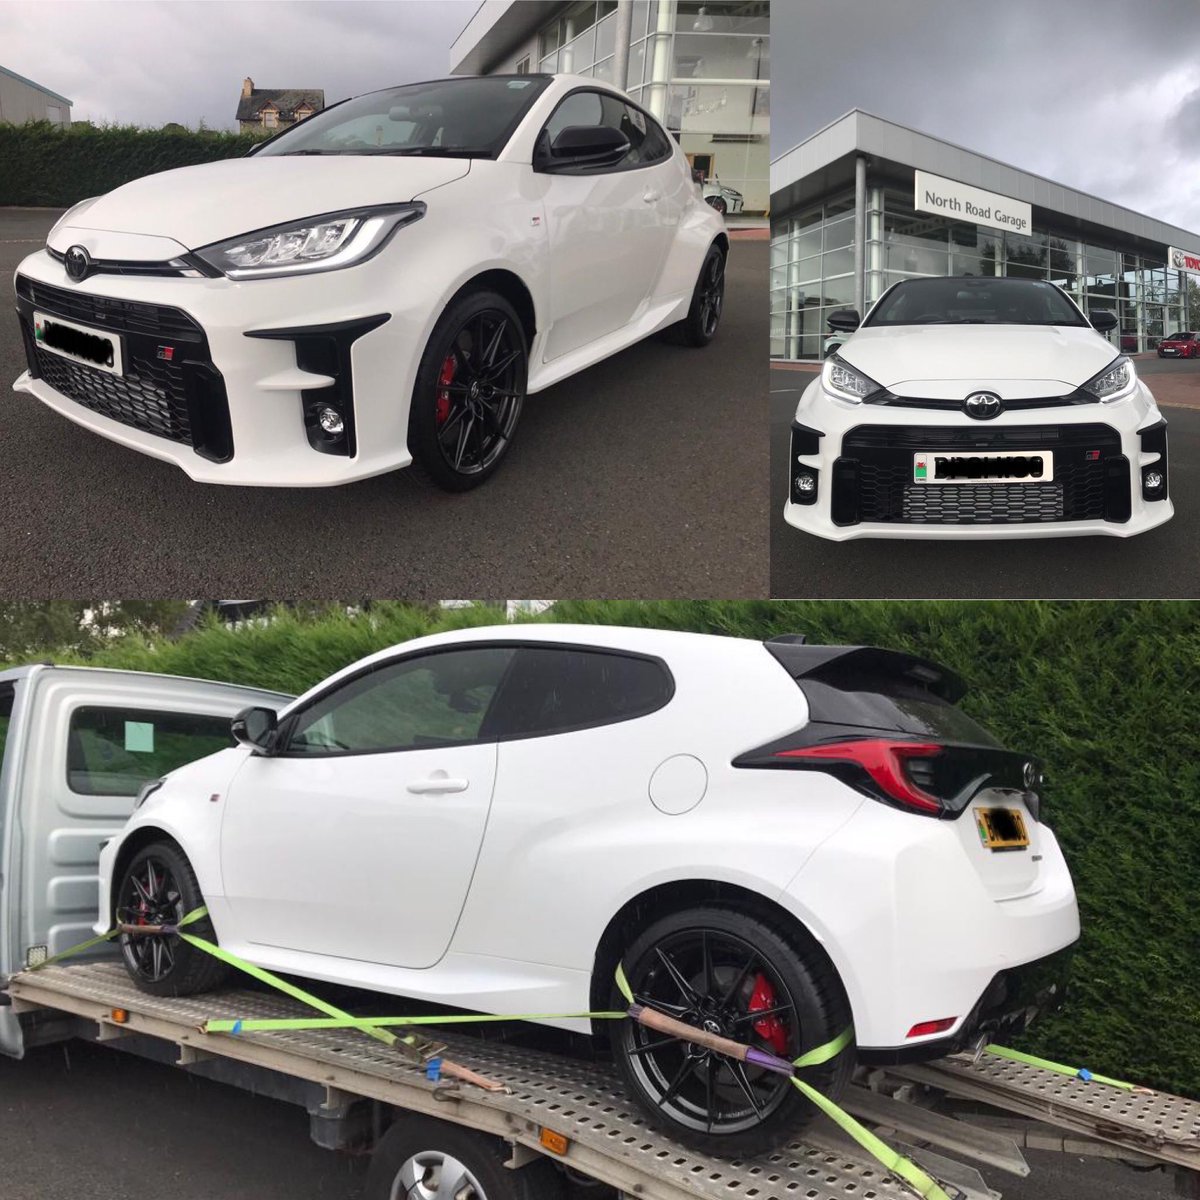 GR Yaris loaded up and heading to it’s owner in time for his wedding this weekend. All the best for your wedding and thank you for your continued custom from us all at NRG.